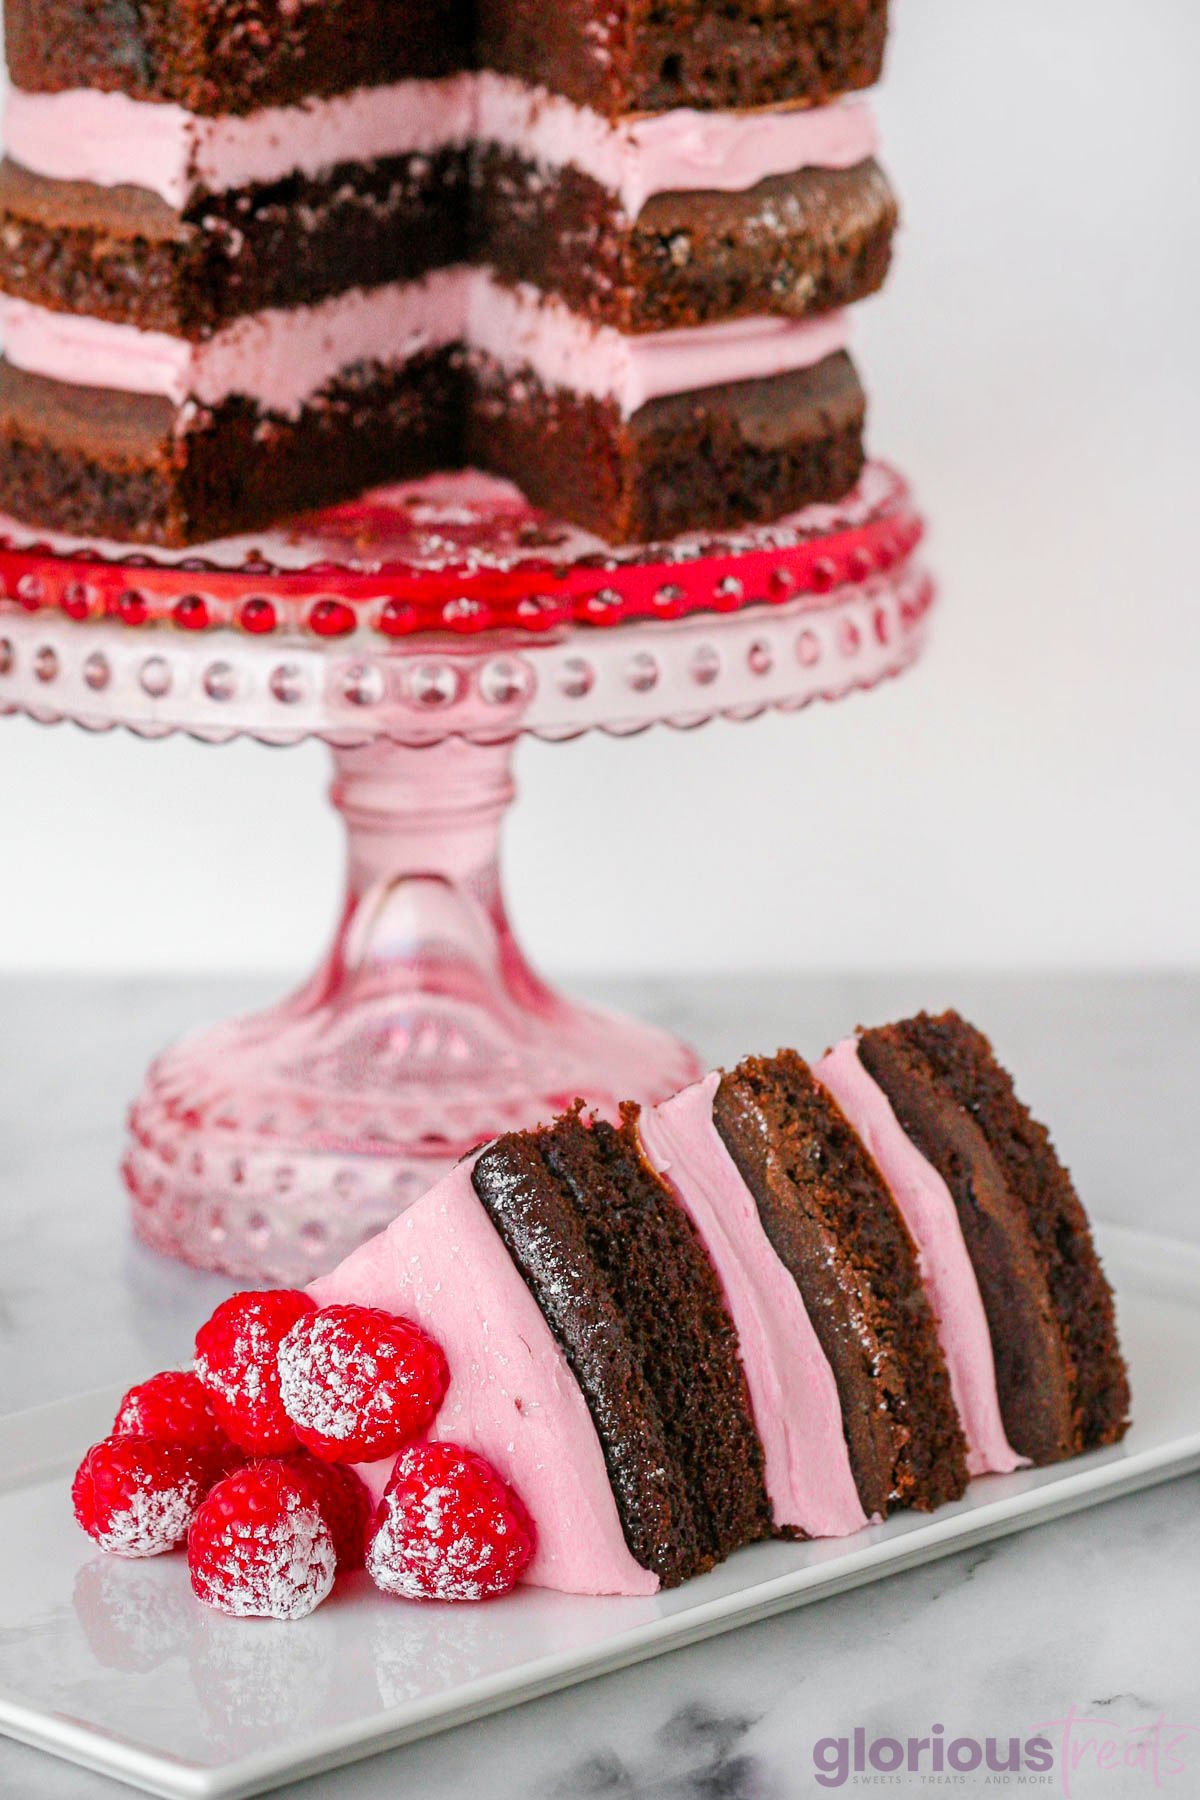 slice of chocolate cake with raspberry cream cheese frosting on plate and the rest of the cake can be seen on a pink cake stand in the background. The cake has been garnished with raspberries and powdered sugar.